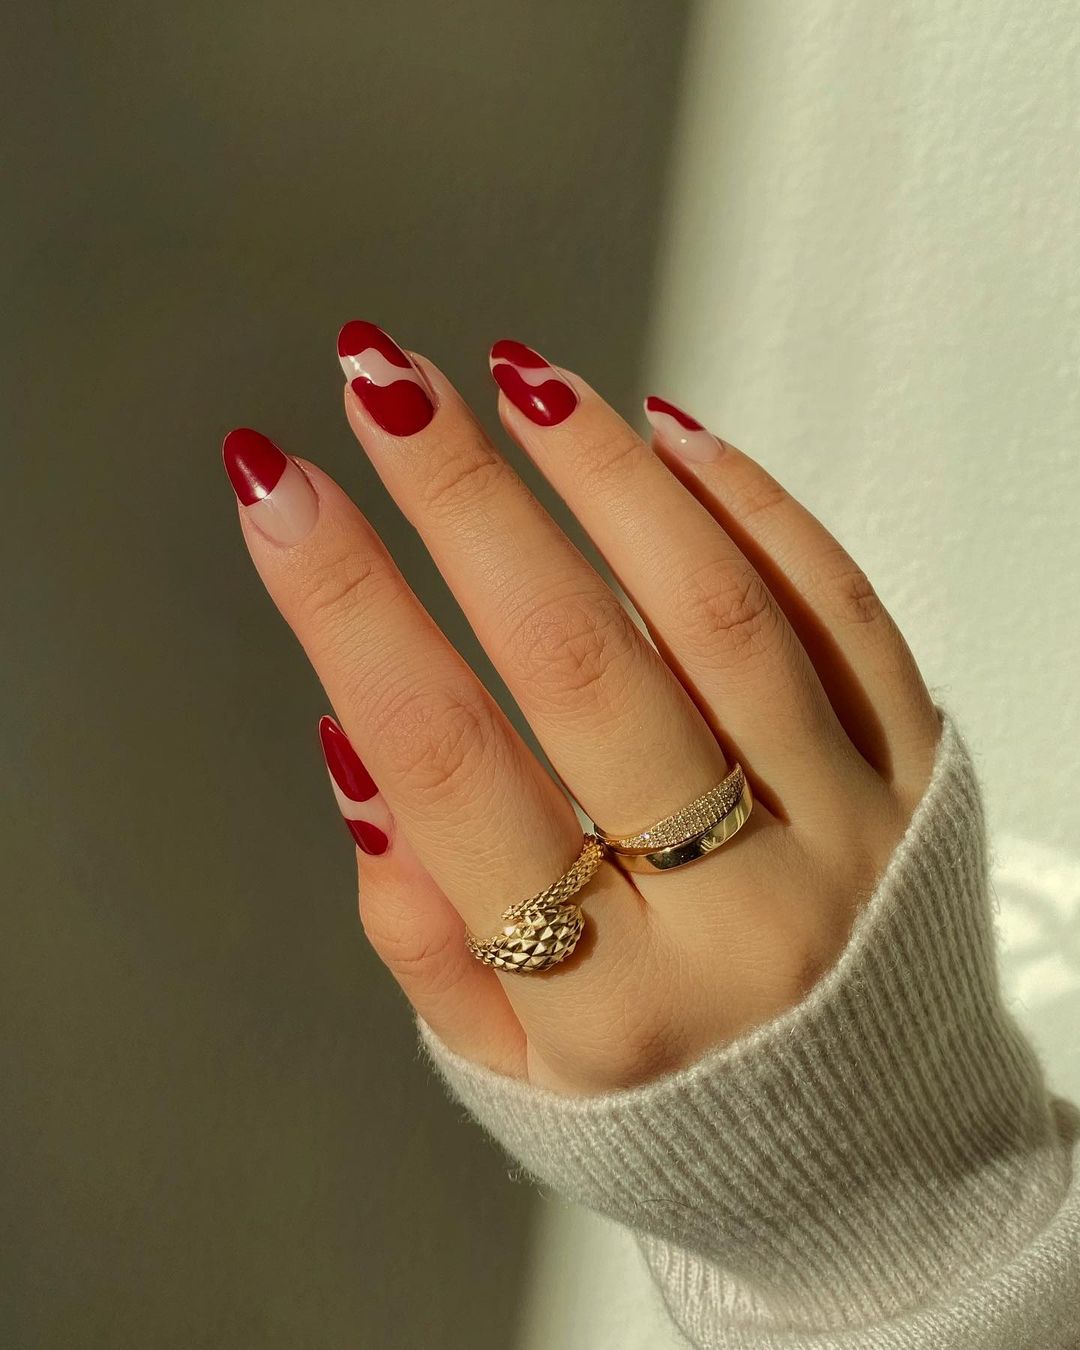 Red Sparkly Nails